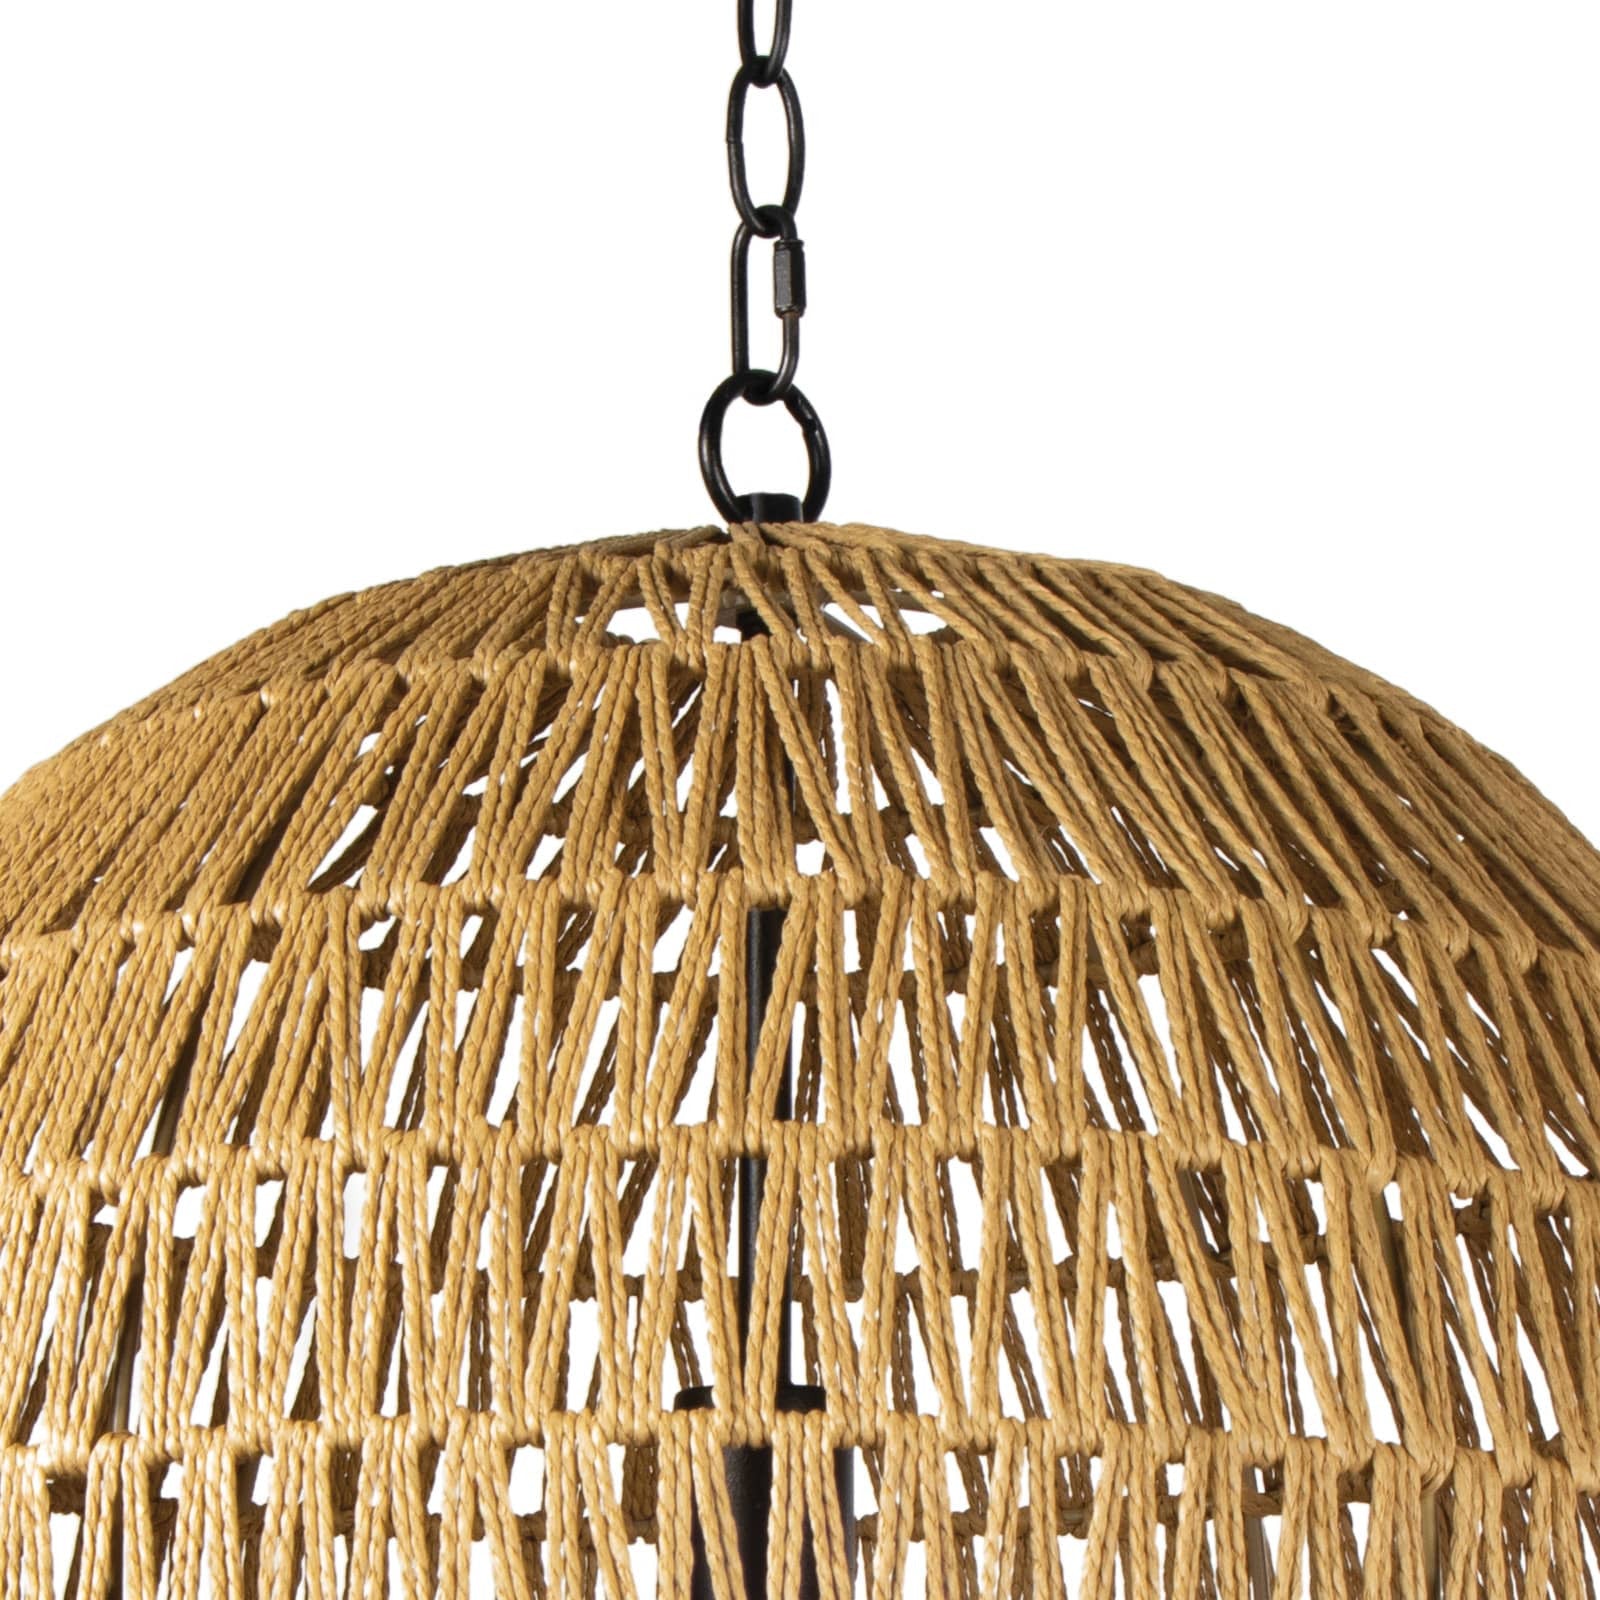 With a relaxed, Cali-cool vibe, the Seaside Pendant Small adds natural texture to any interior design. Thin jute is wrapped atop a natural-toned, metal globe in a pattern intended to let light shine through and out.    Overall Dimensions: 20"w x 20"d x 24"h